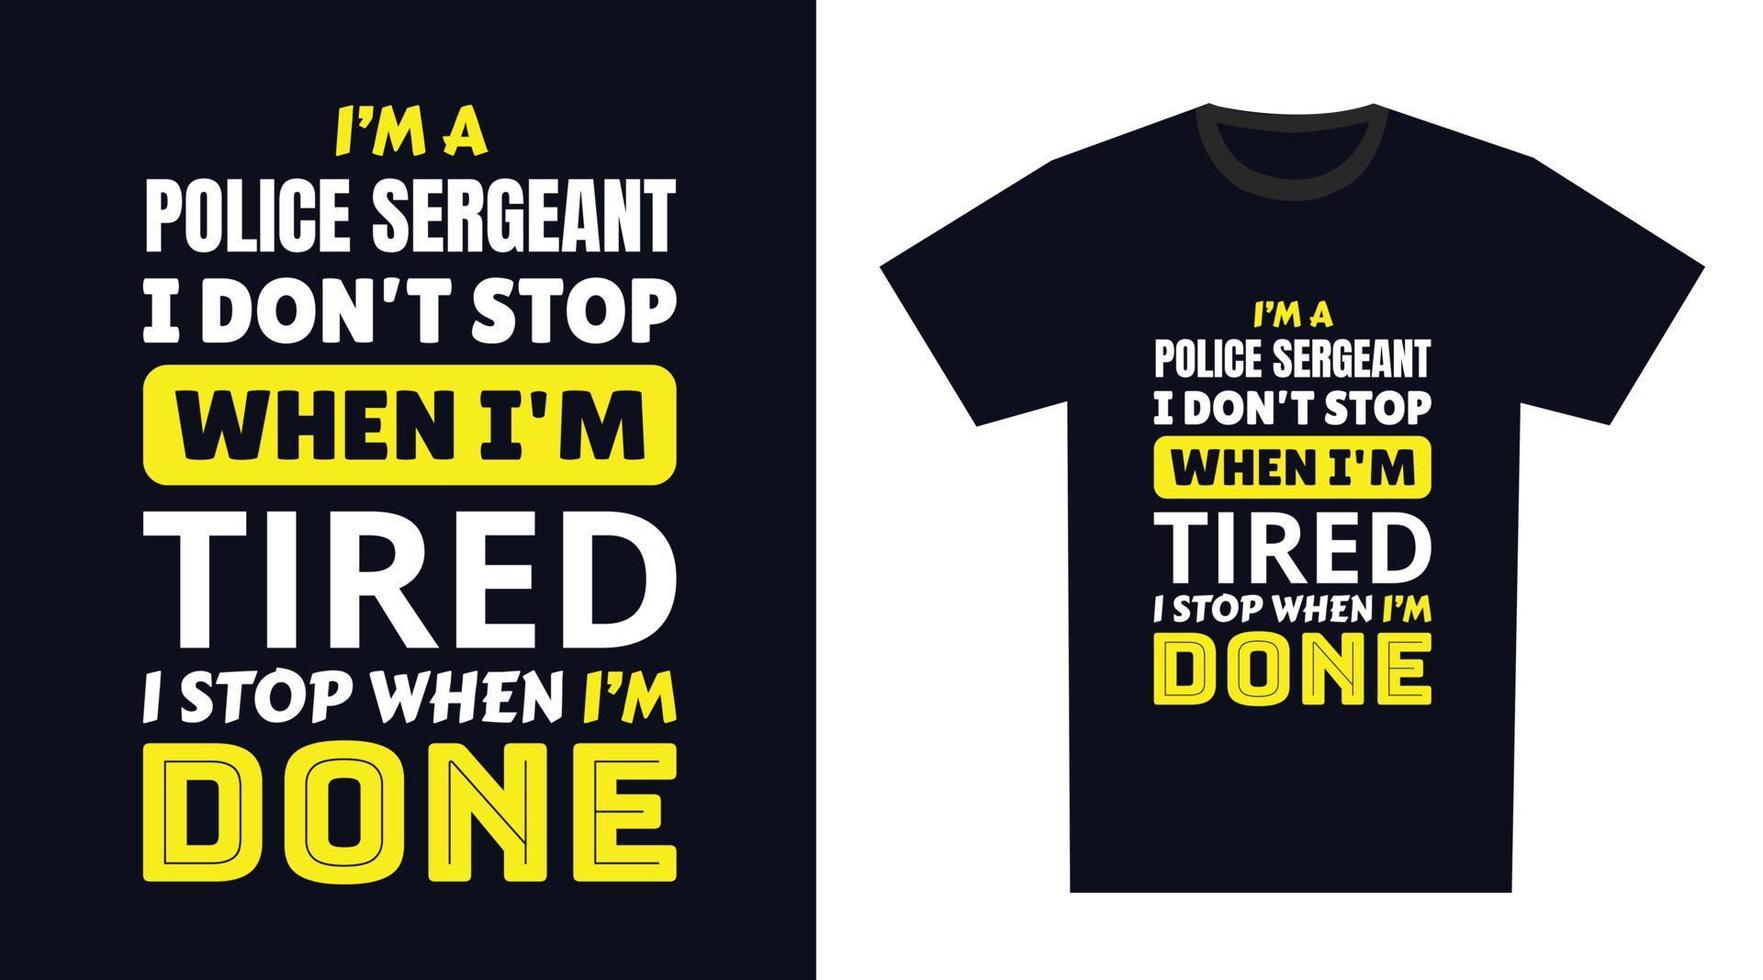 police sergeant T Shirt Design. I 'm a police sergeant I Don't Stop When I'm Tired, I Stop When I'm Done vector